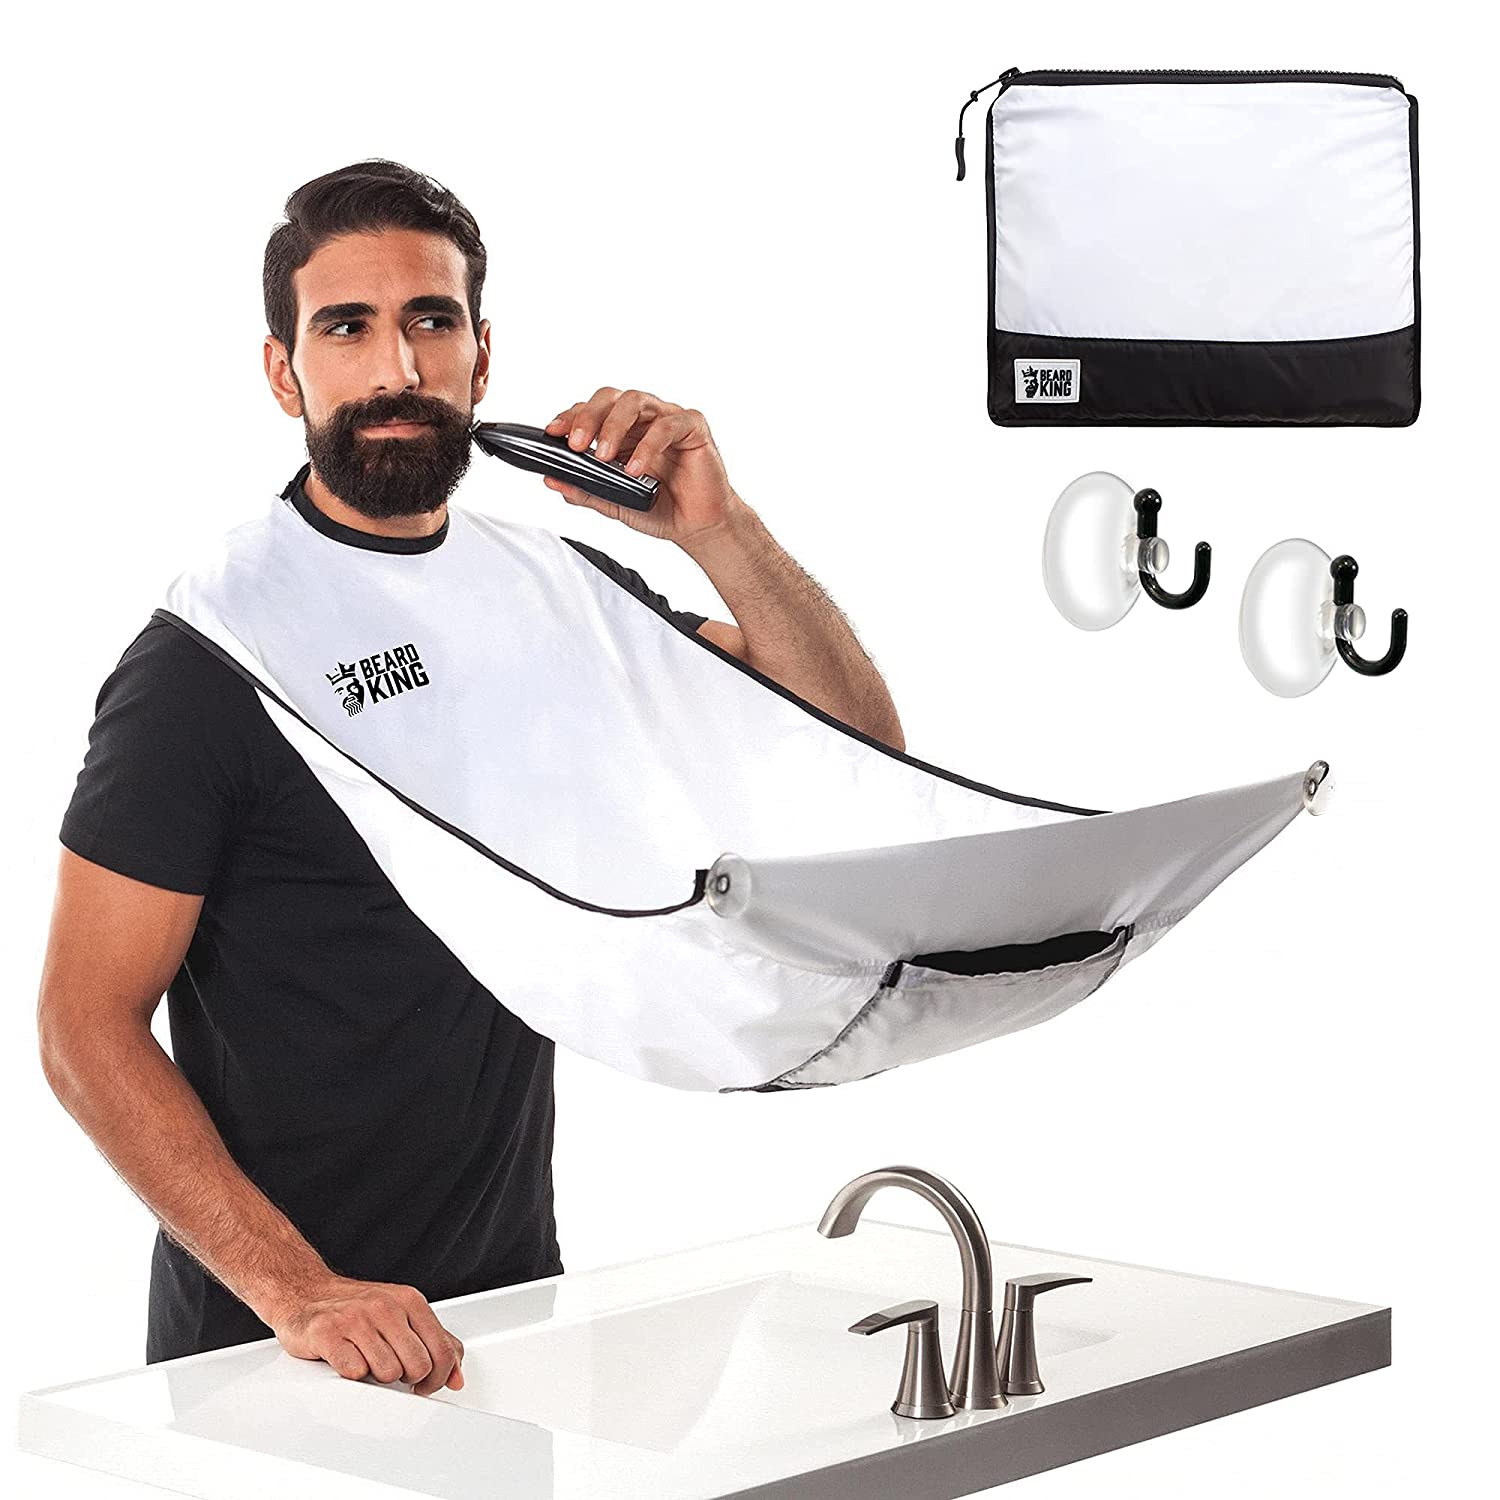 A man is standing in front of a mirror using a beard bib apron and preparing to shave this beard and catch the mess in the apron.